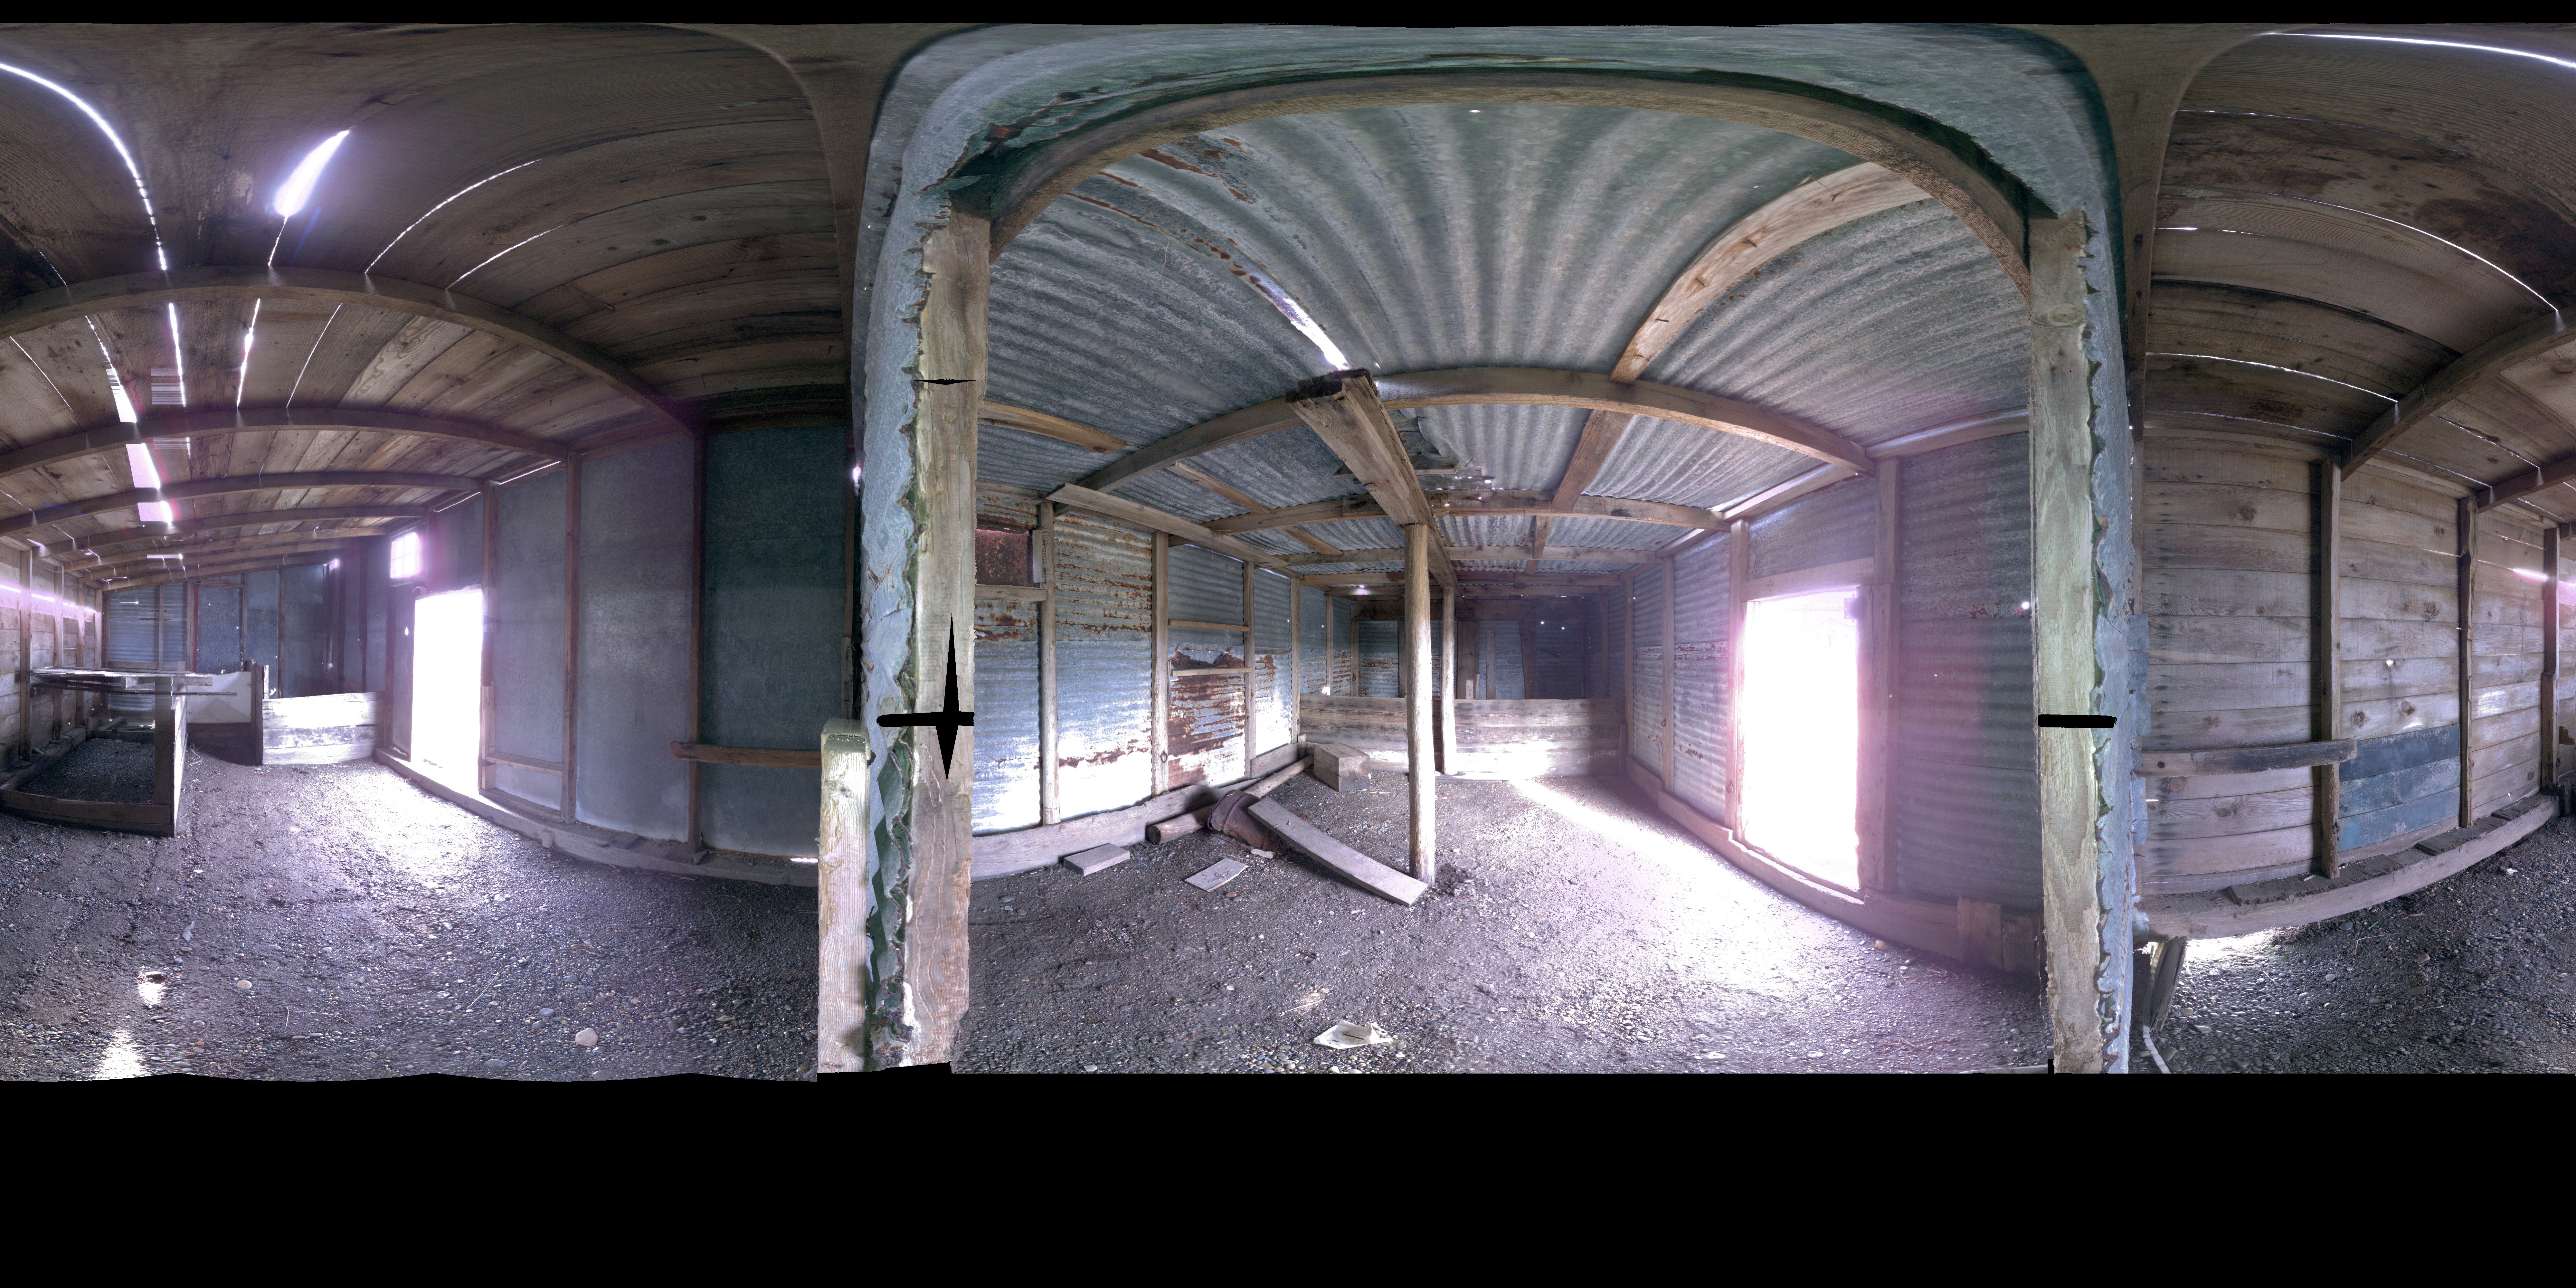 Panoramic view of the RCMP Dog Kennels and Run from the Leica BKL 360, scanning location 5.